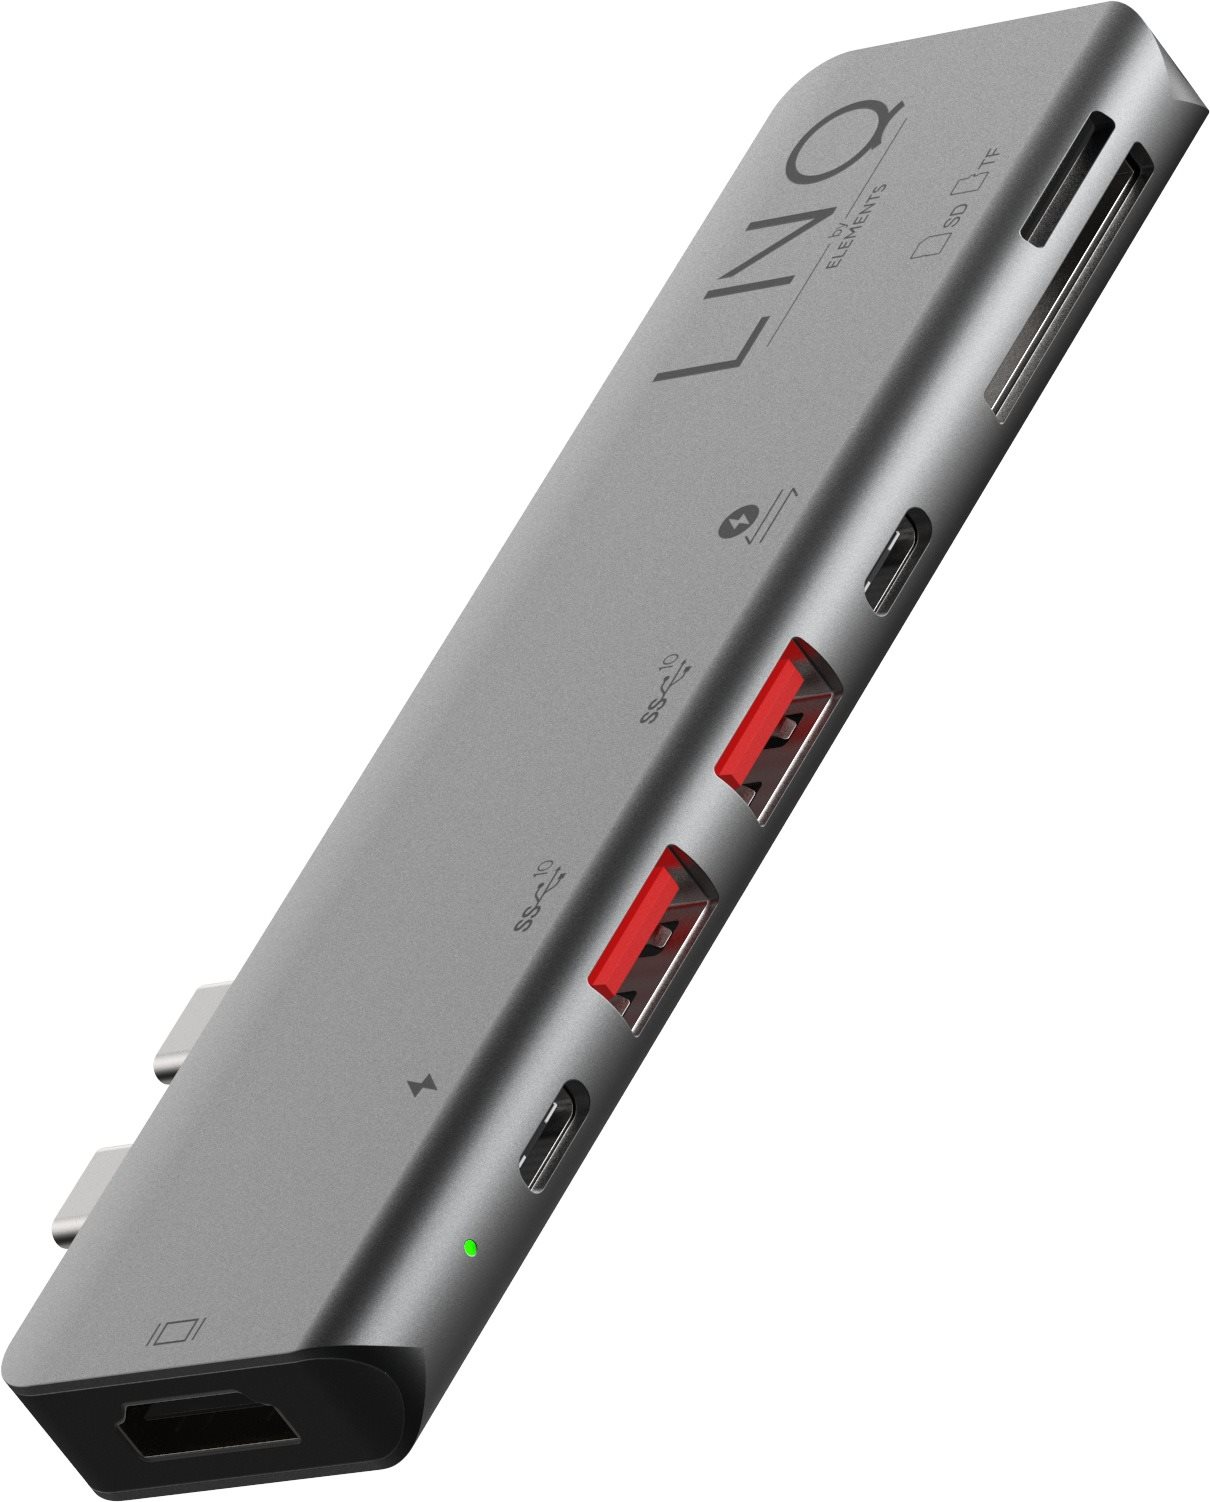 LINQ Pro USB-C 10Gbps Multiport Hub with 4K HDMI and Thunderbolt Passthrough for MacBook